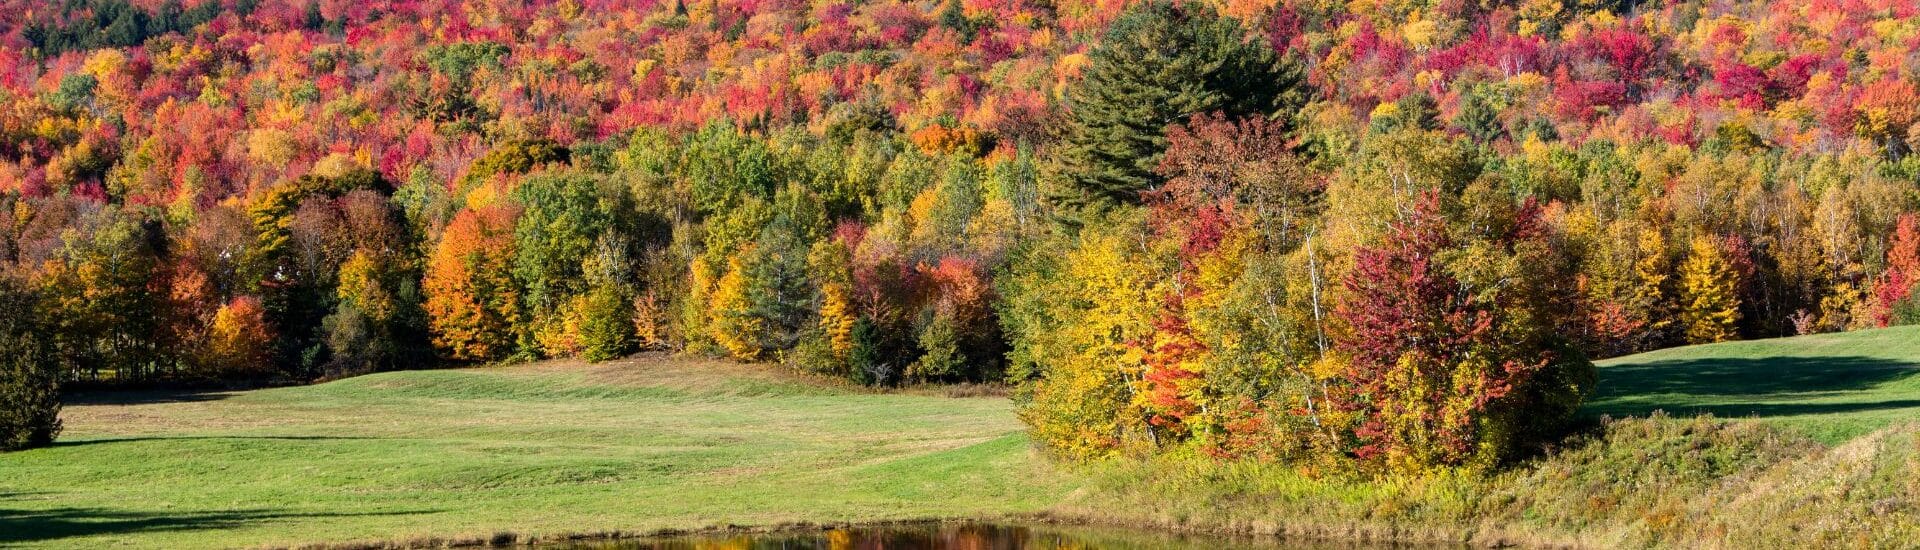 Stunning red and green foliage covers a hill with a pond in the foreground